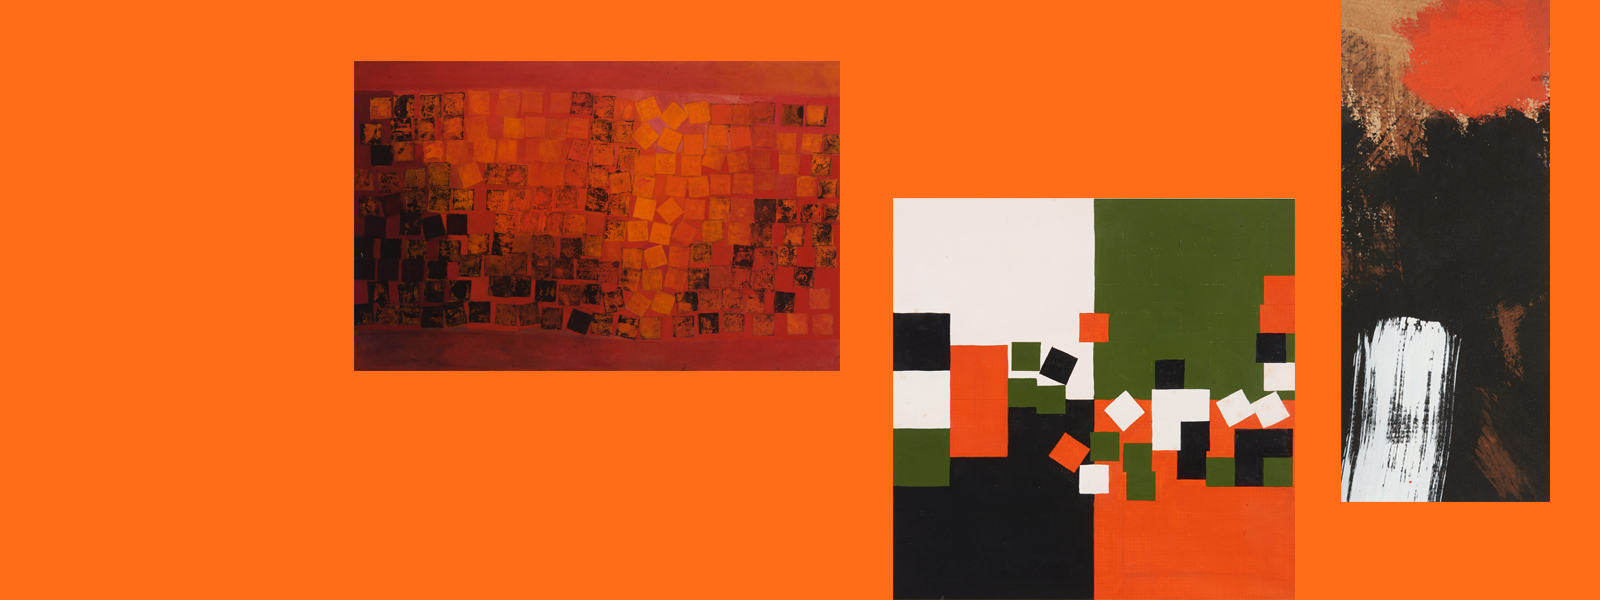 Three paintings grouped on an orange background. From left to right: an abstract composition of randomly arranged small squares in browns and oranges on a red background; an abstract composition with squares of varying sizes in orange, green, black and white; a narrow vertical composition of loose brushstrokes in black, brown, red and white.